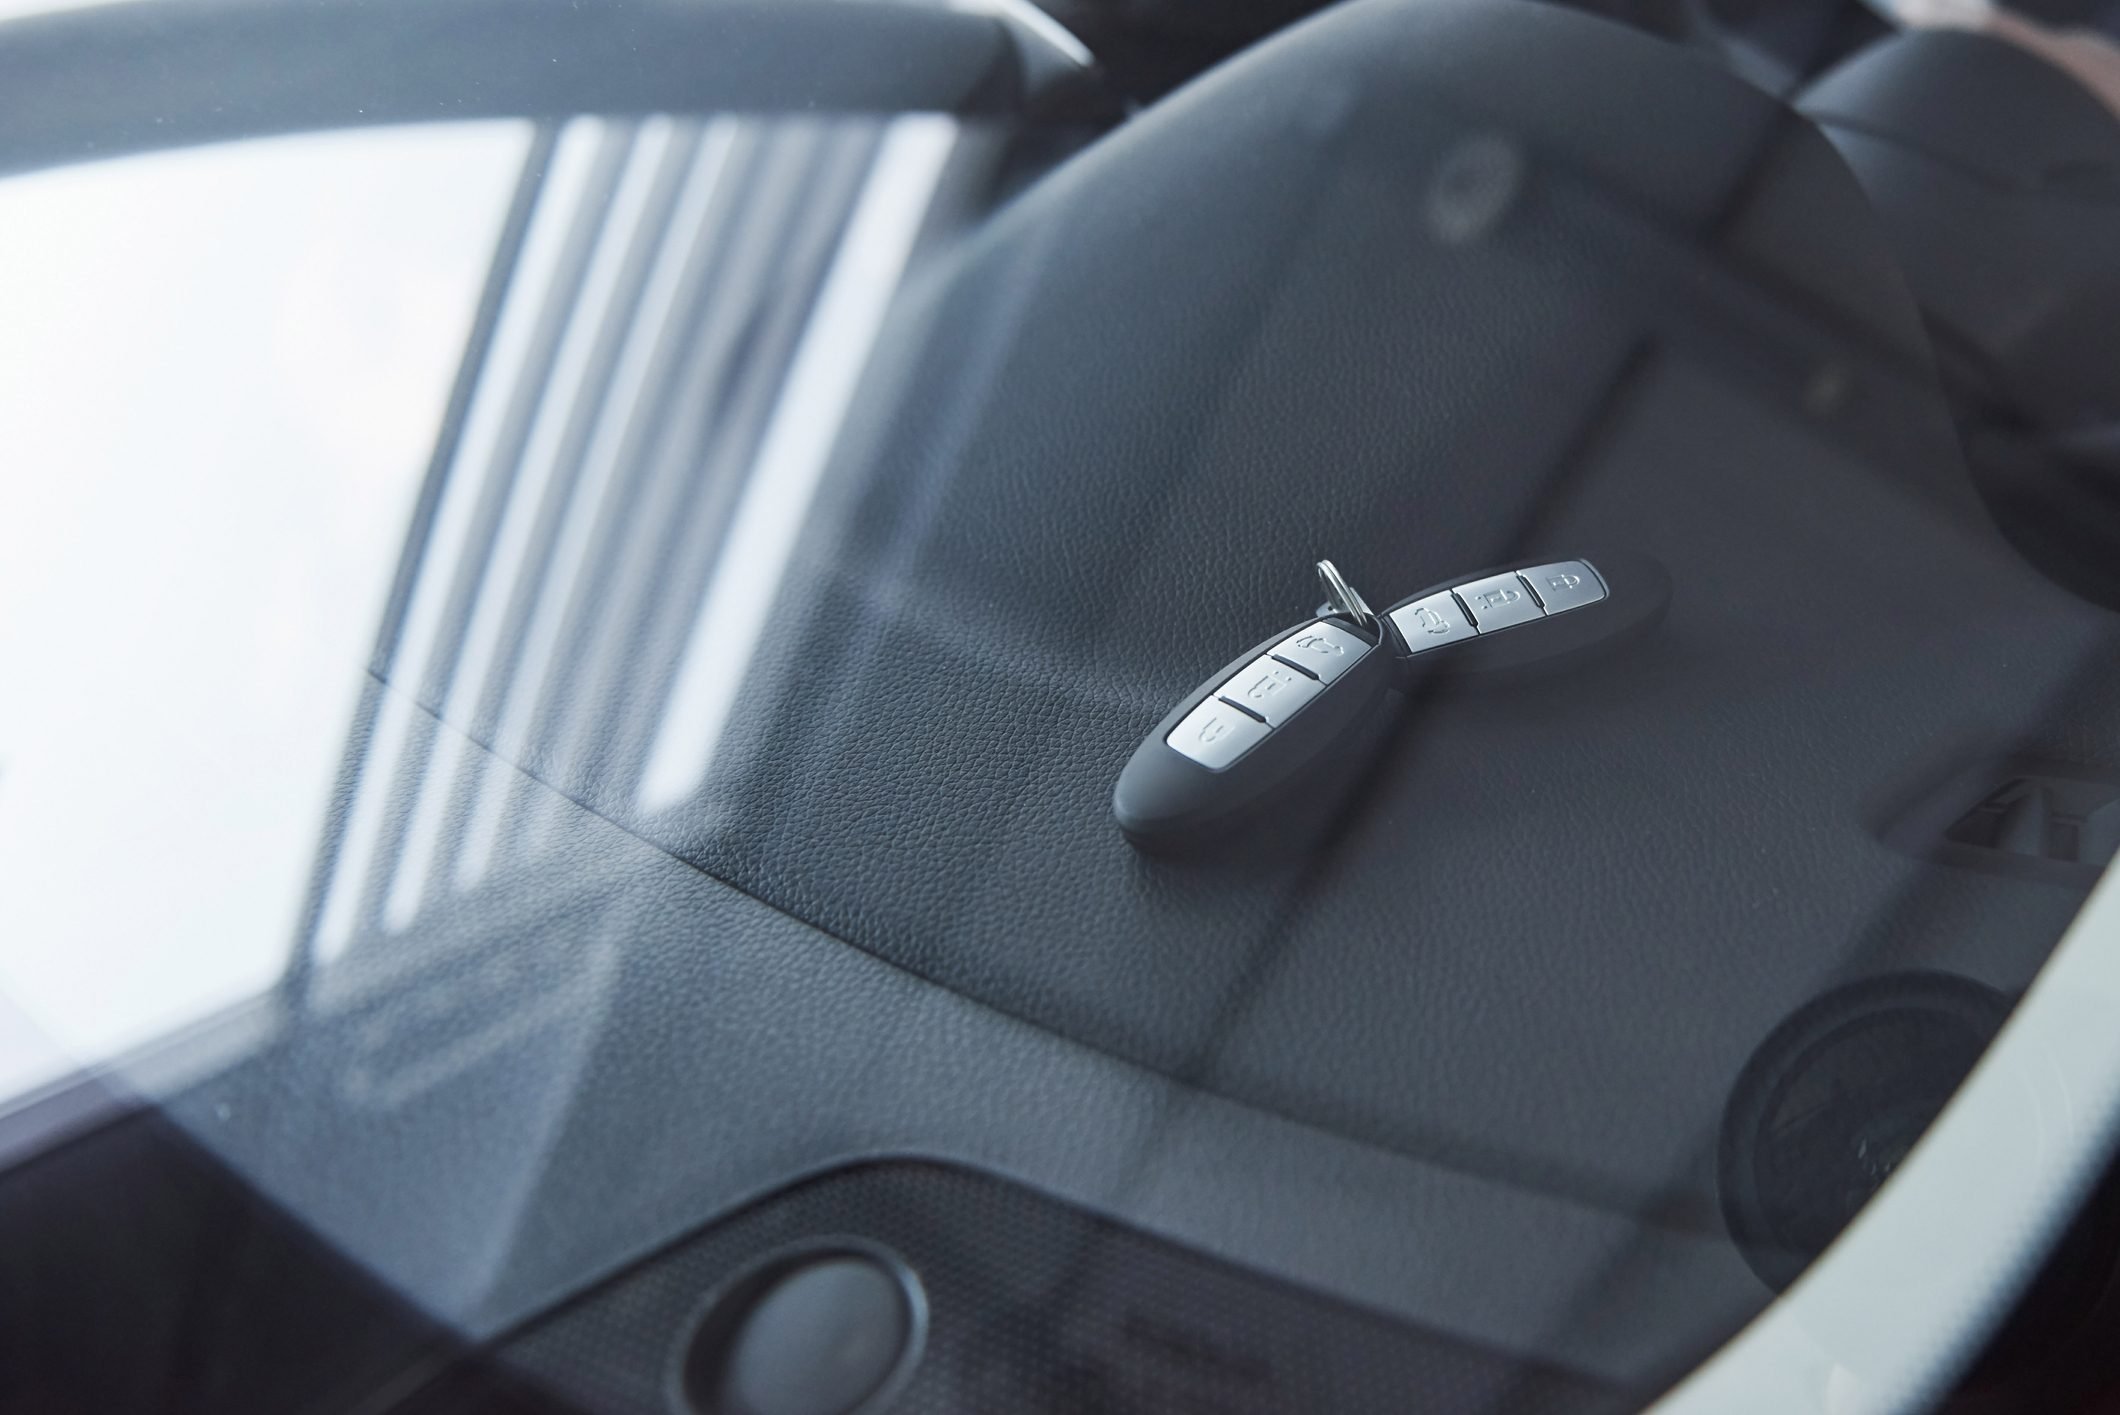 android, here’s what to do if you lock your keys in the car